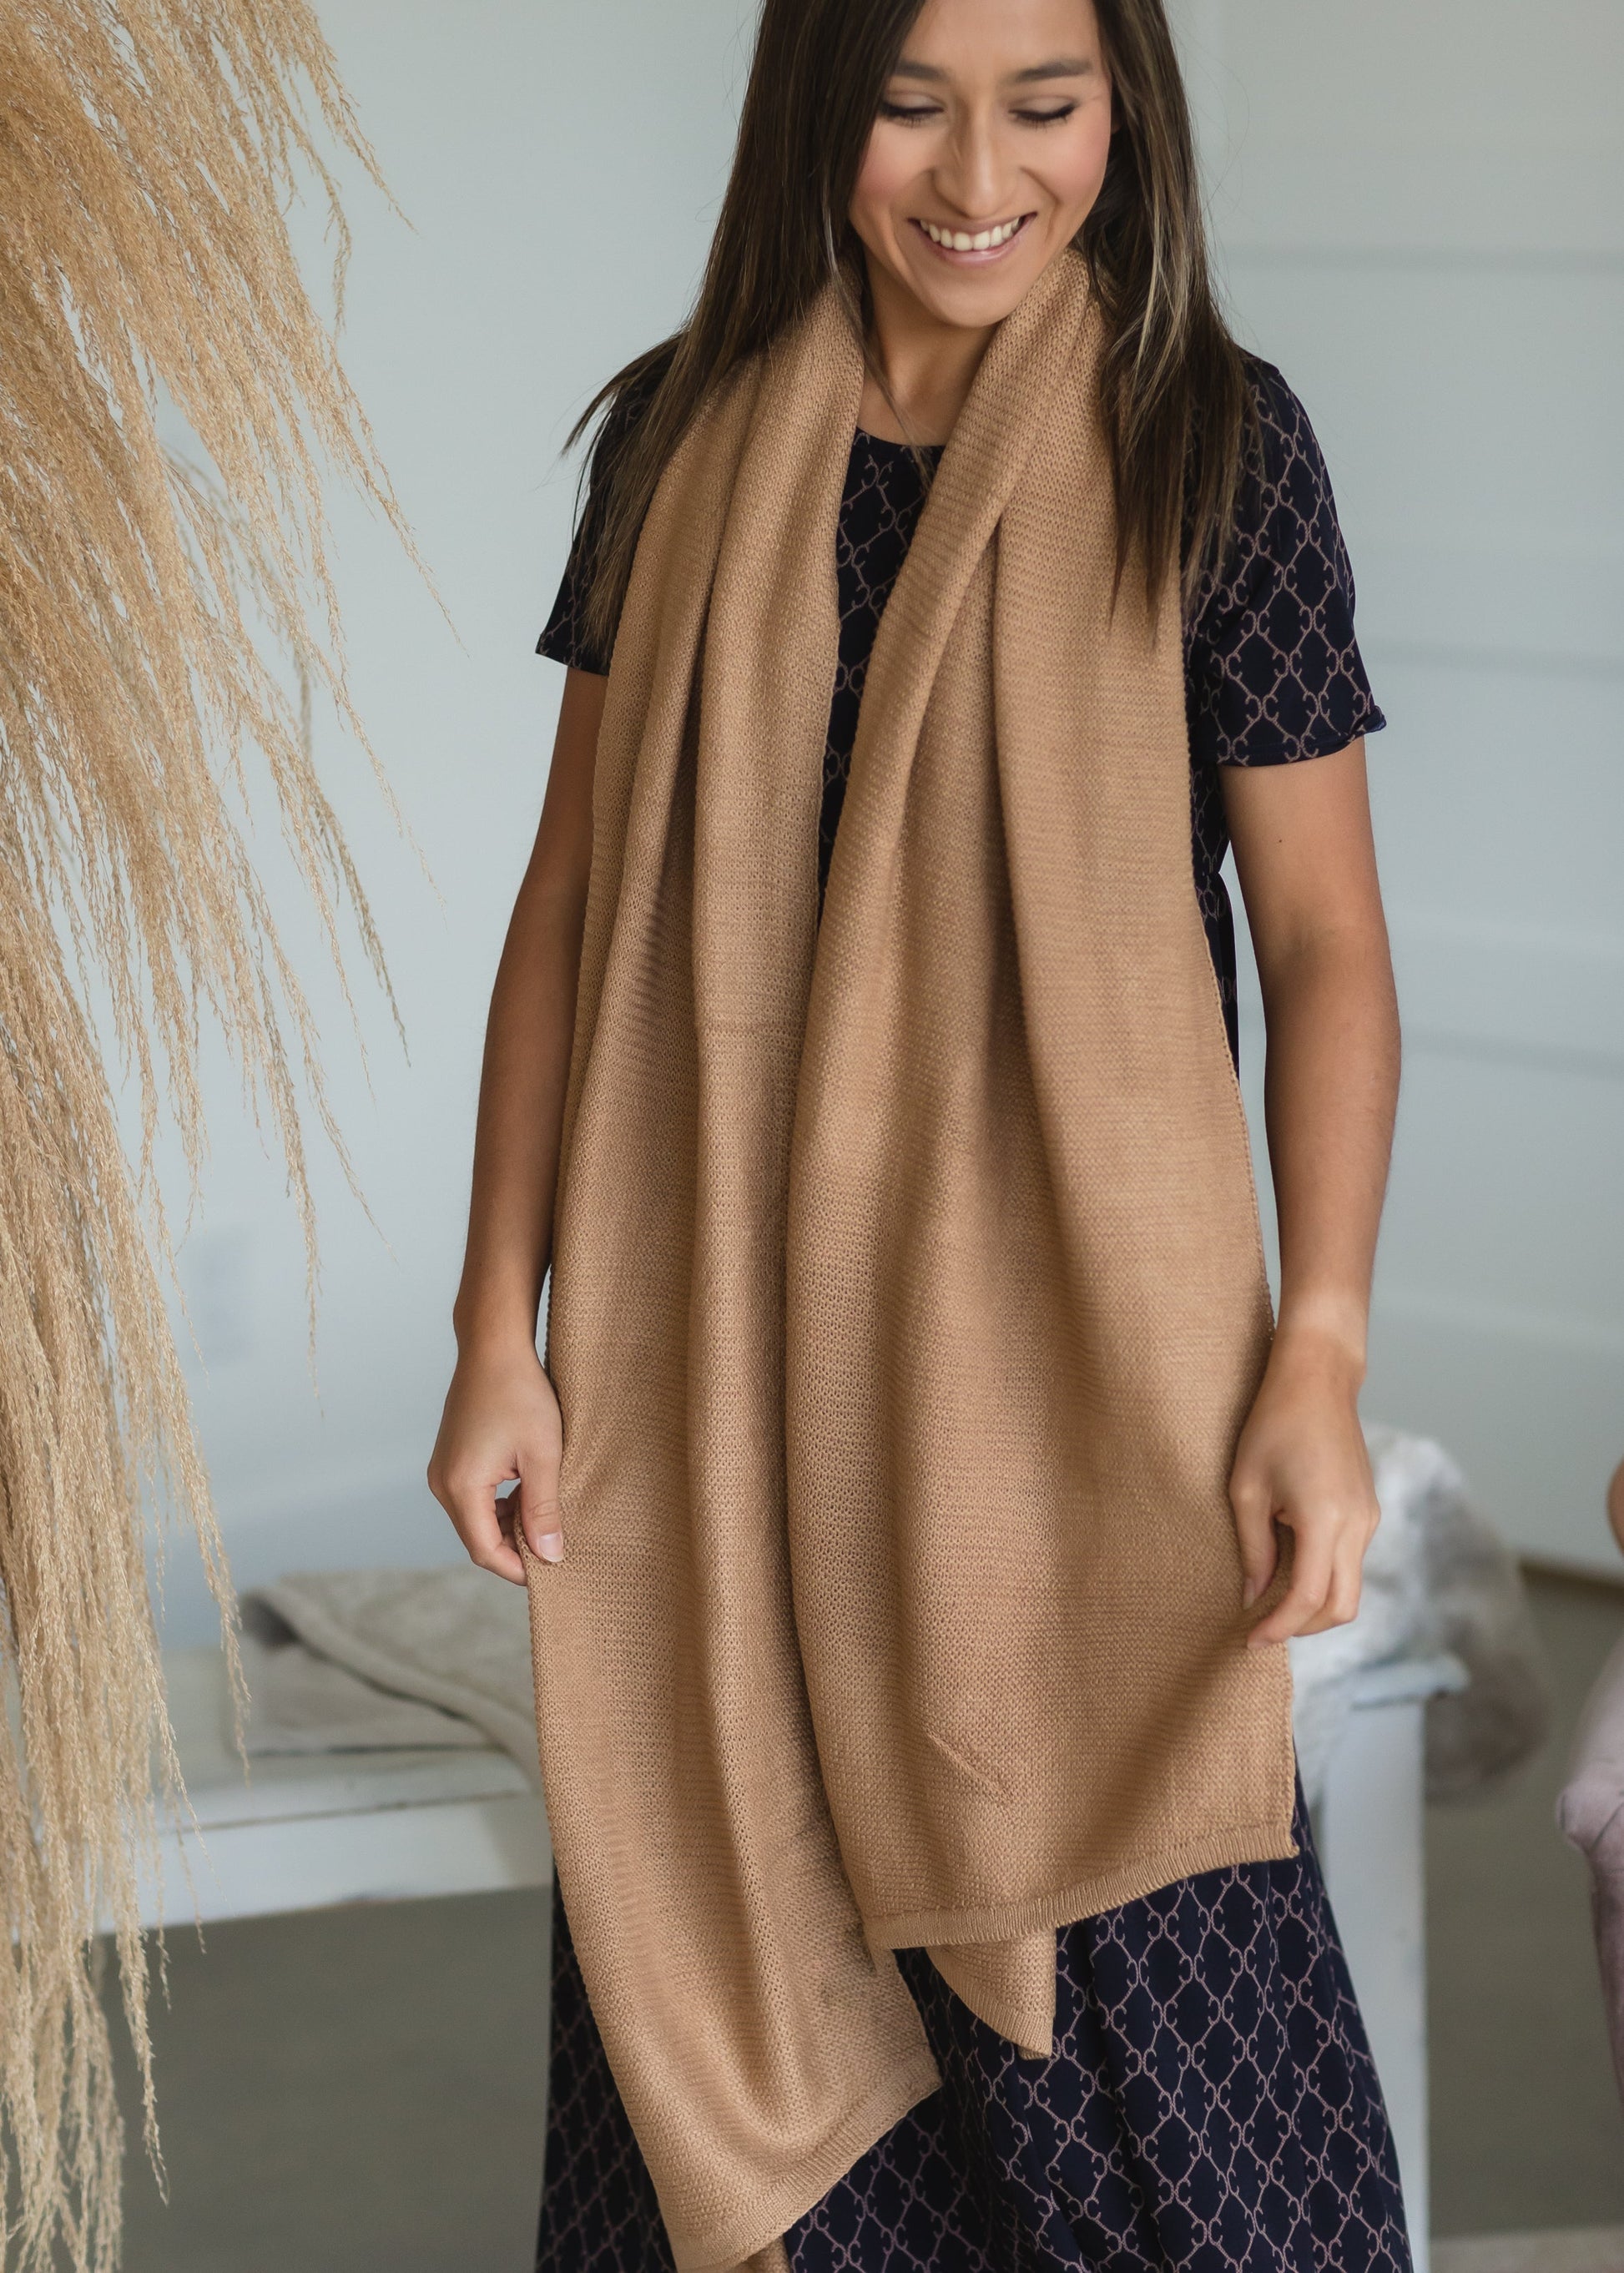 Taupe Knit Stitched Scarf - FINAL SALE Accessories